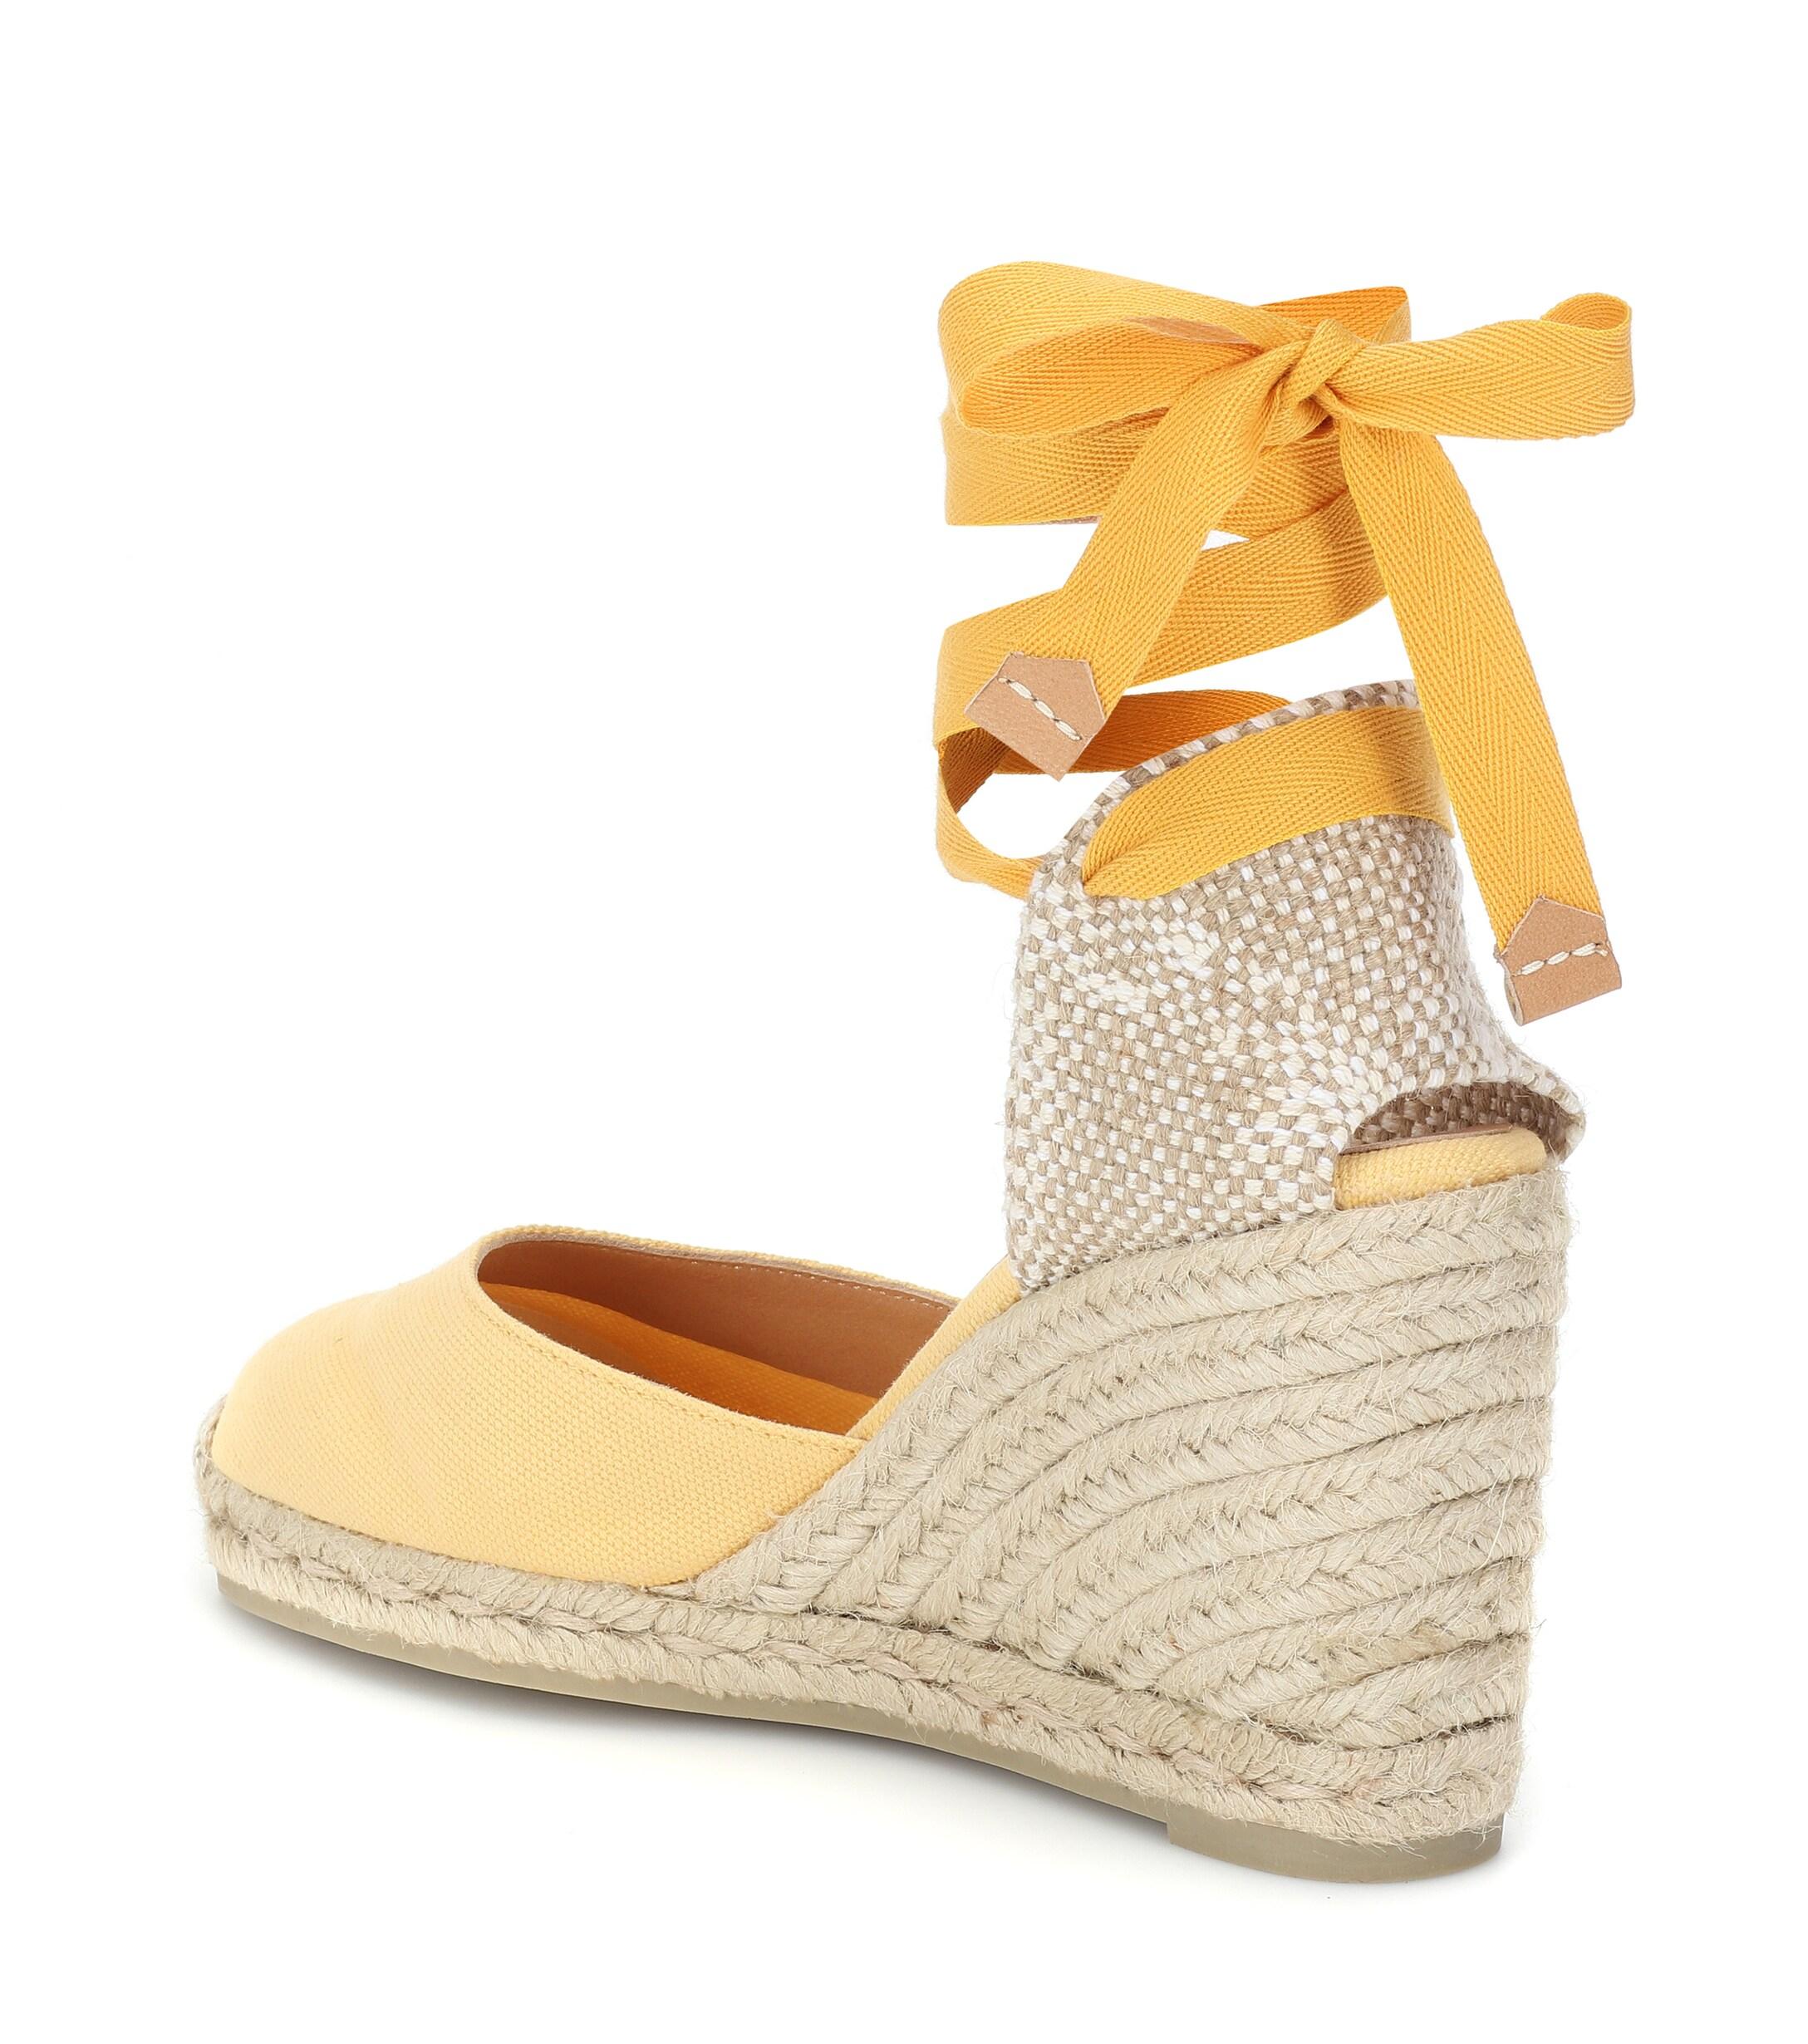 Castaner Cotton Carina Canvas Wedge Espadrilles in Yellow - Save 41% - Lyst